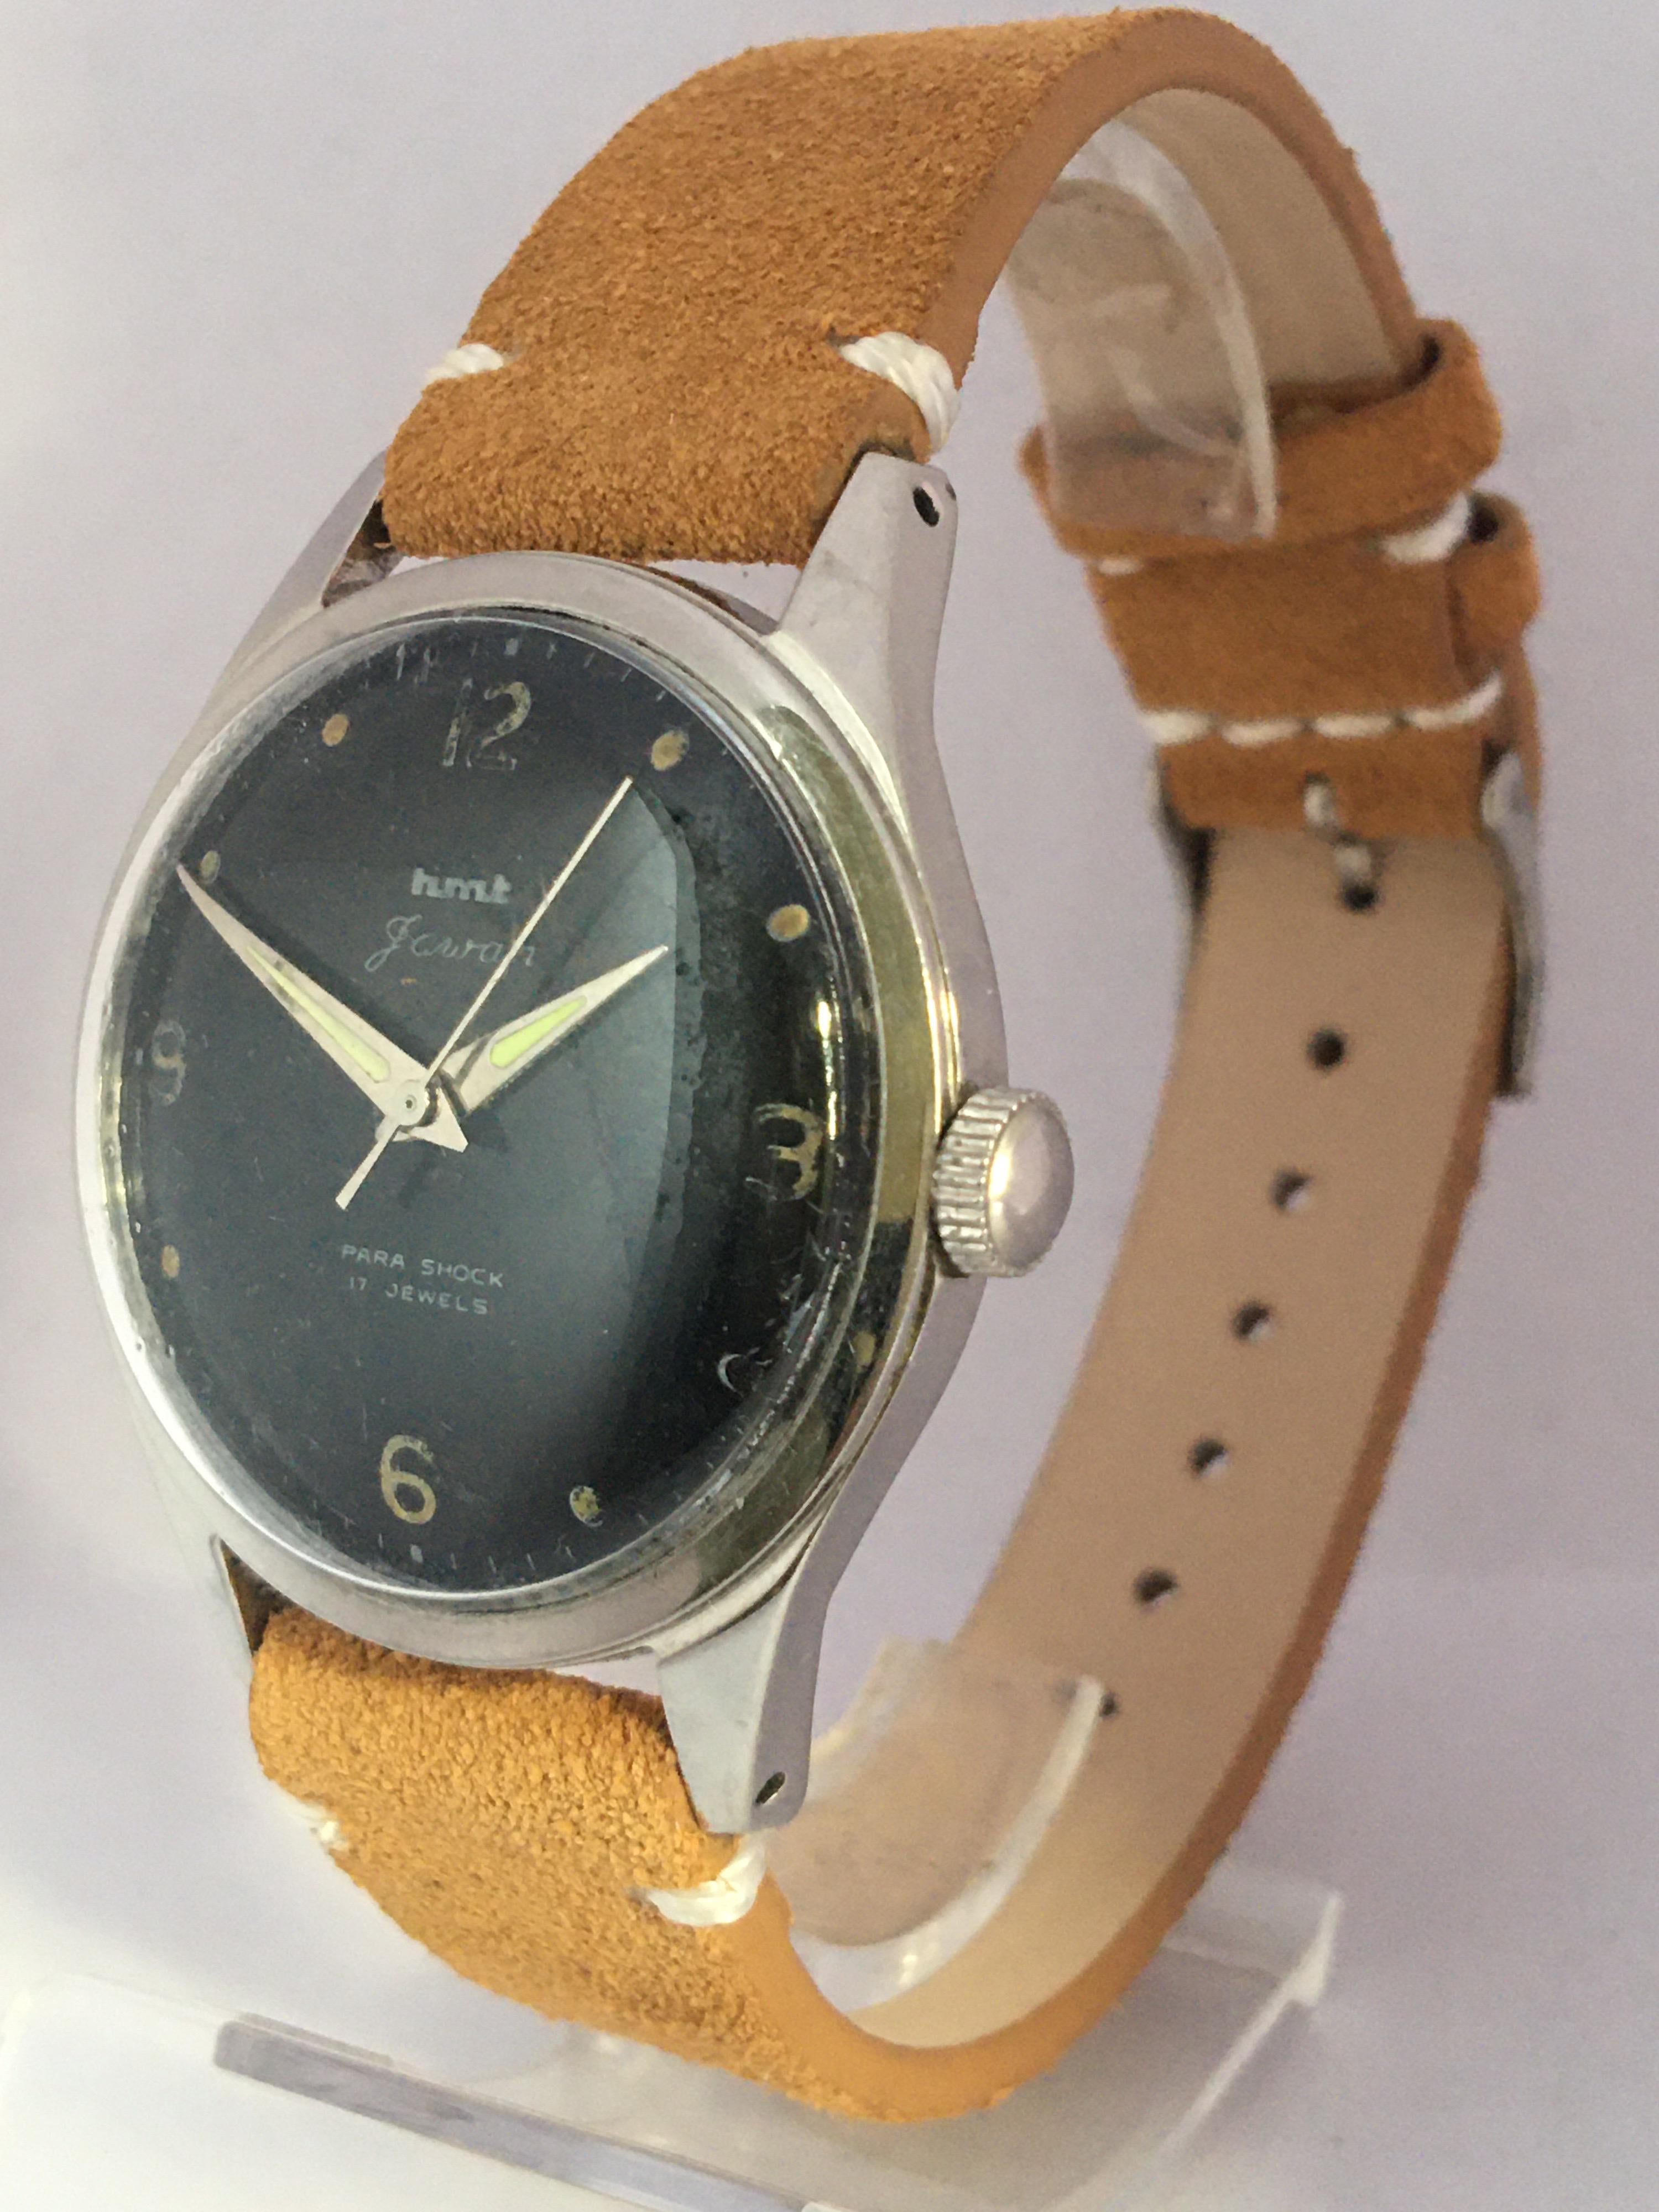 hmt military watch